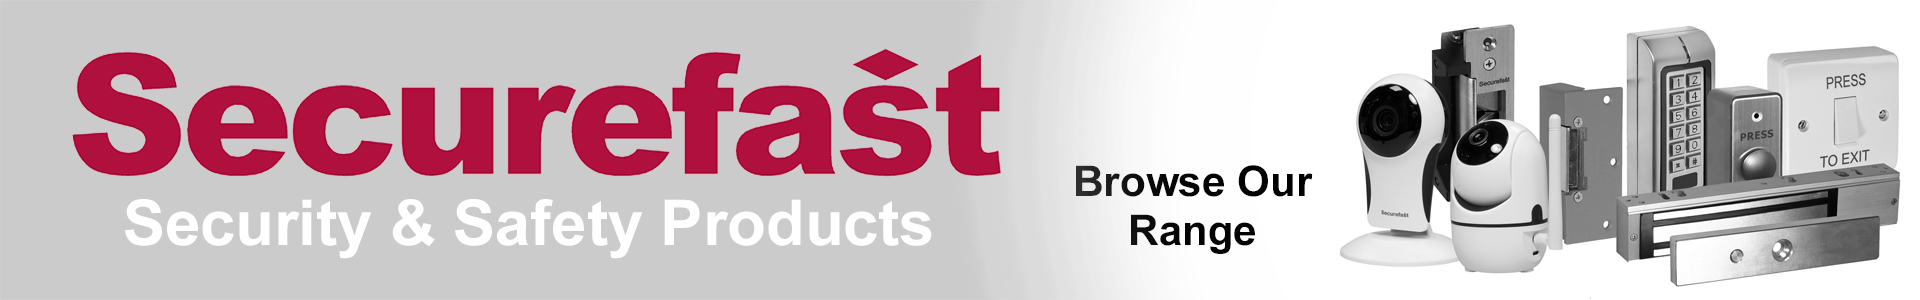 Find out more about Securefast and their products